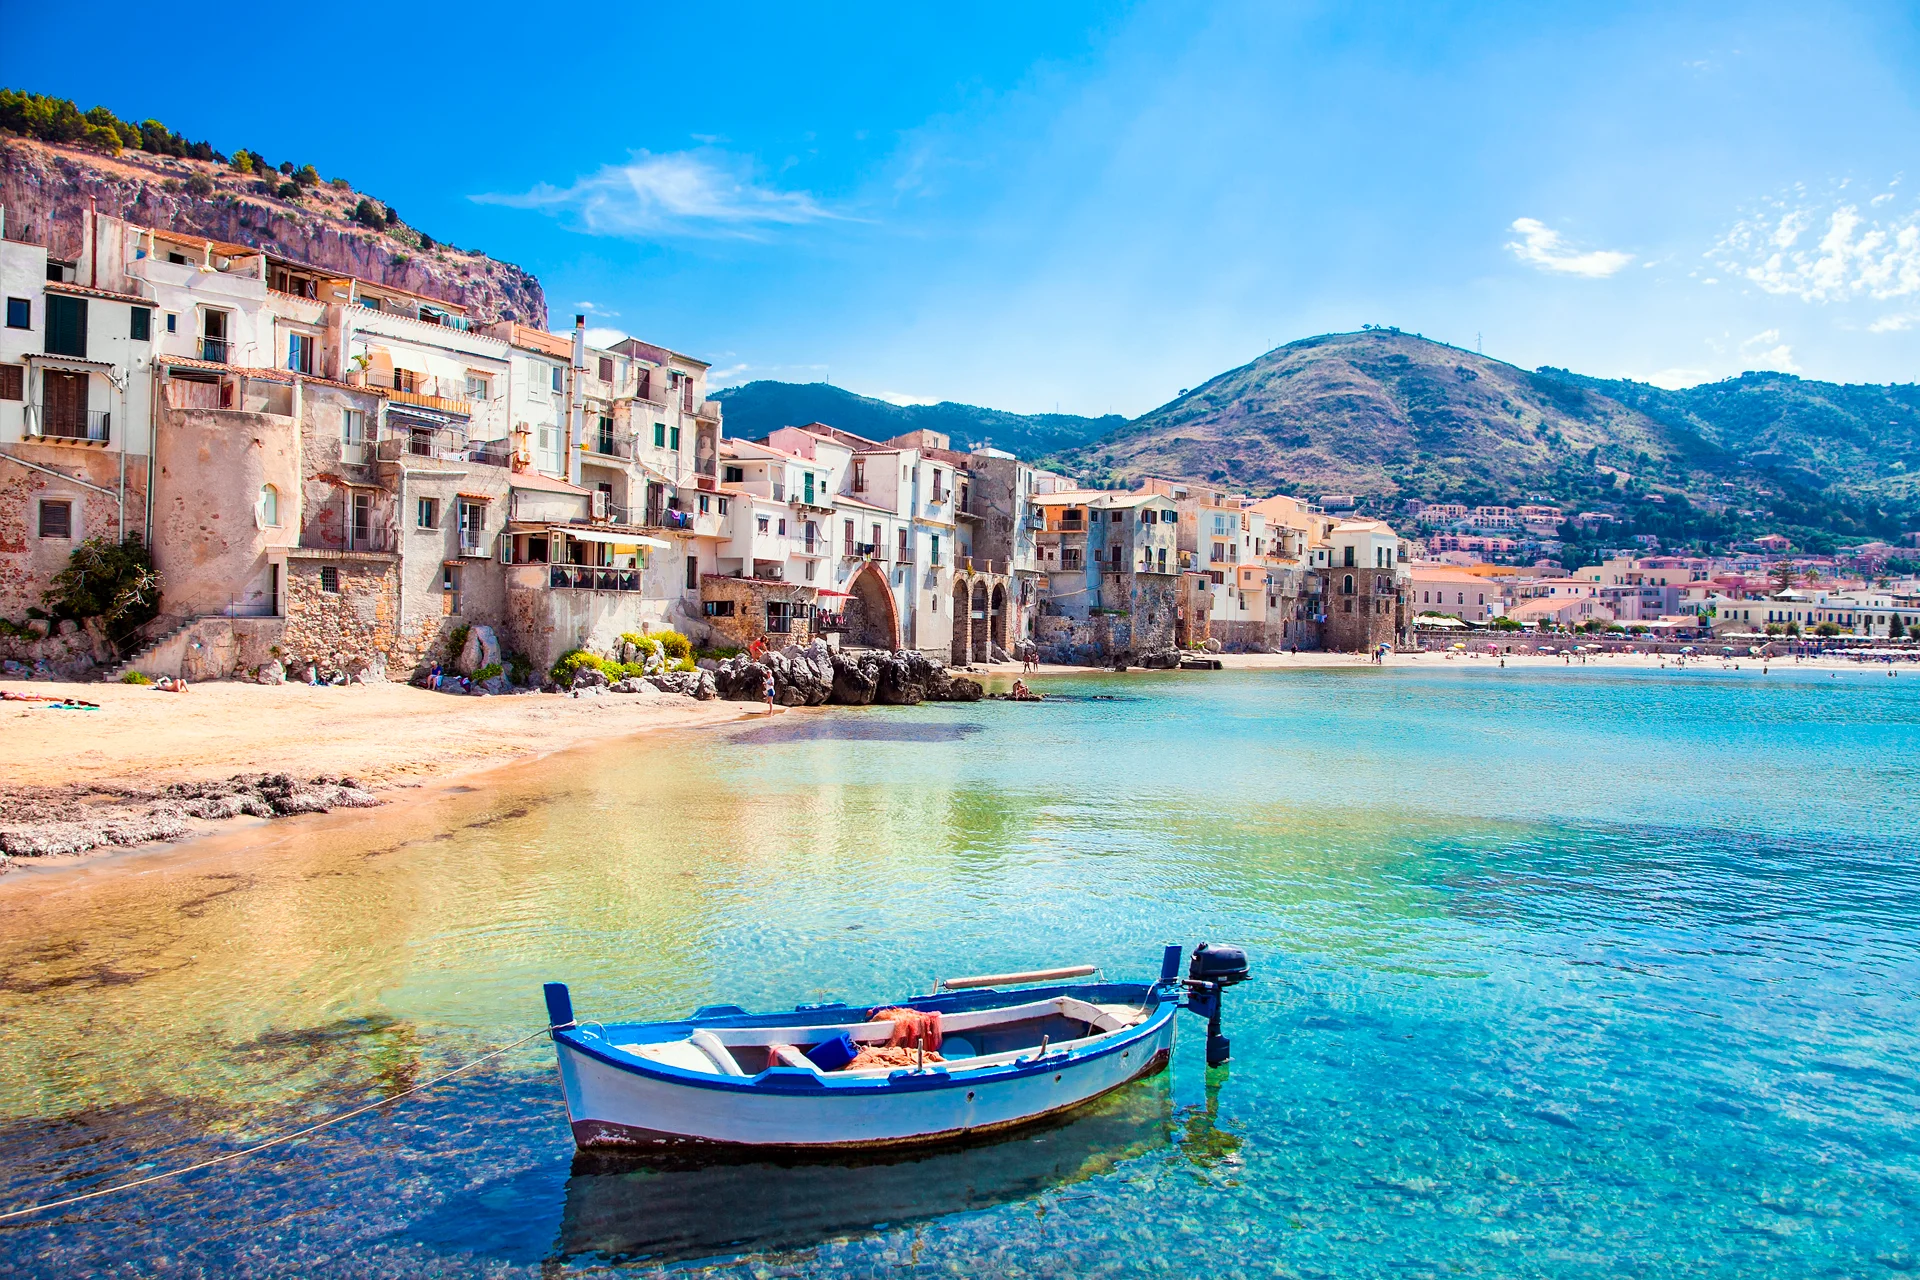 Sicily crystal water beach sailboat old town